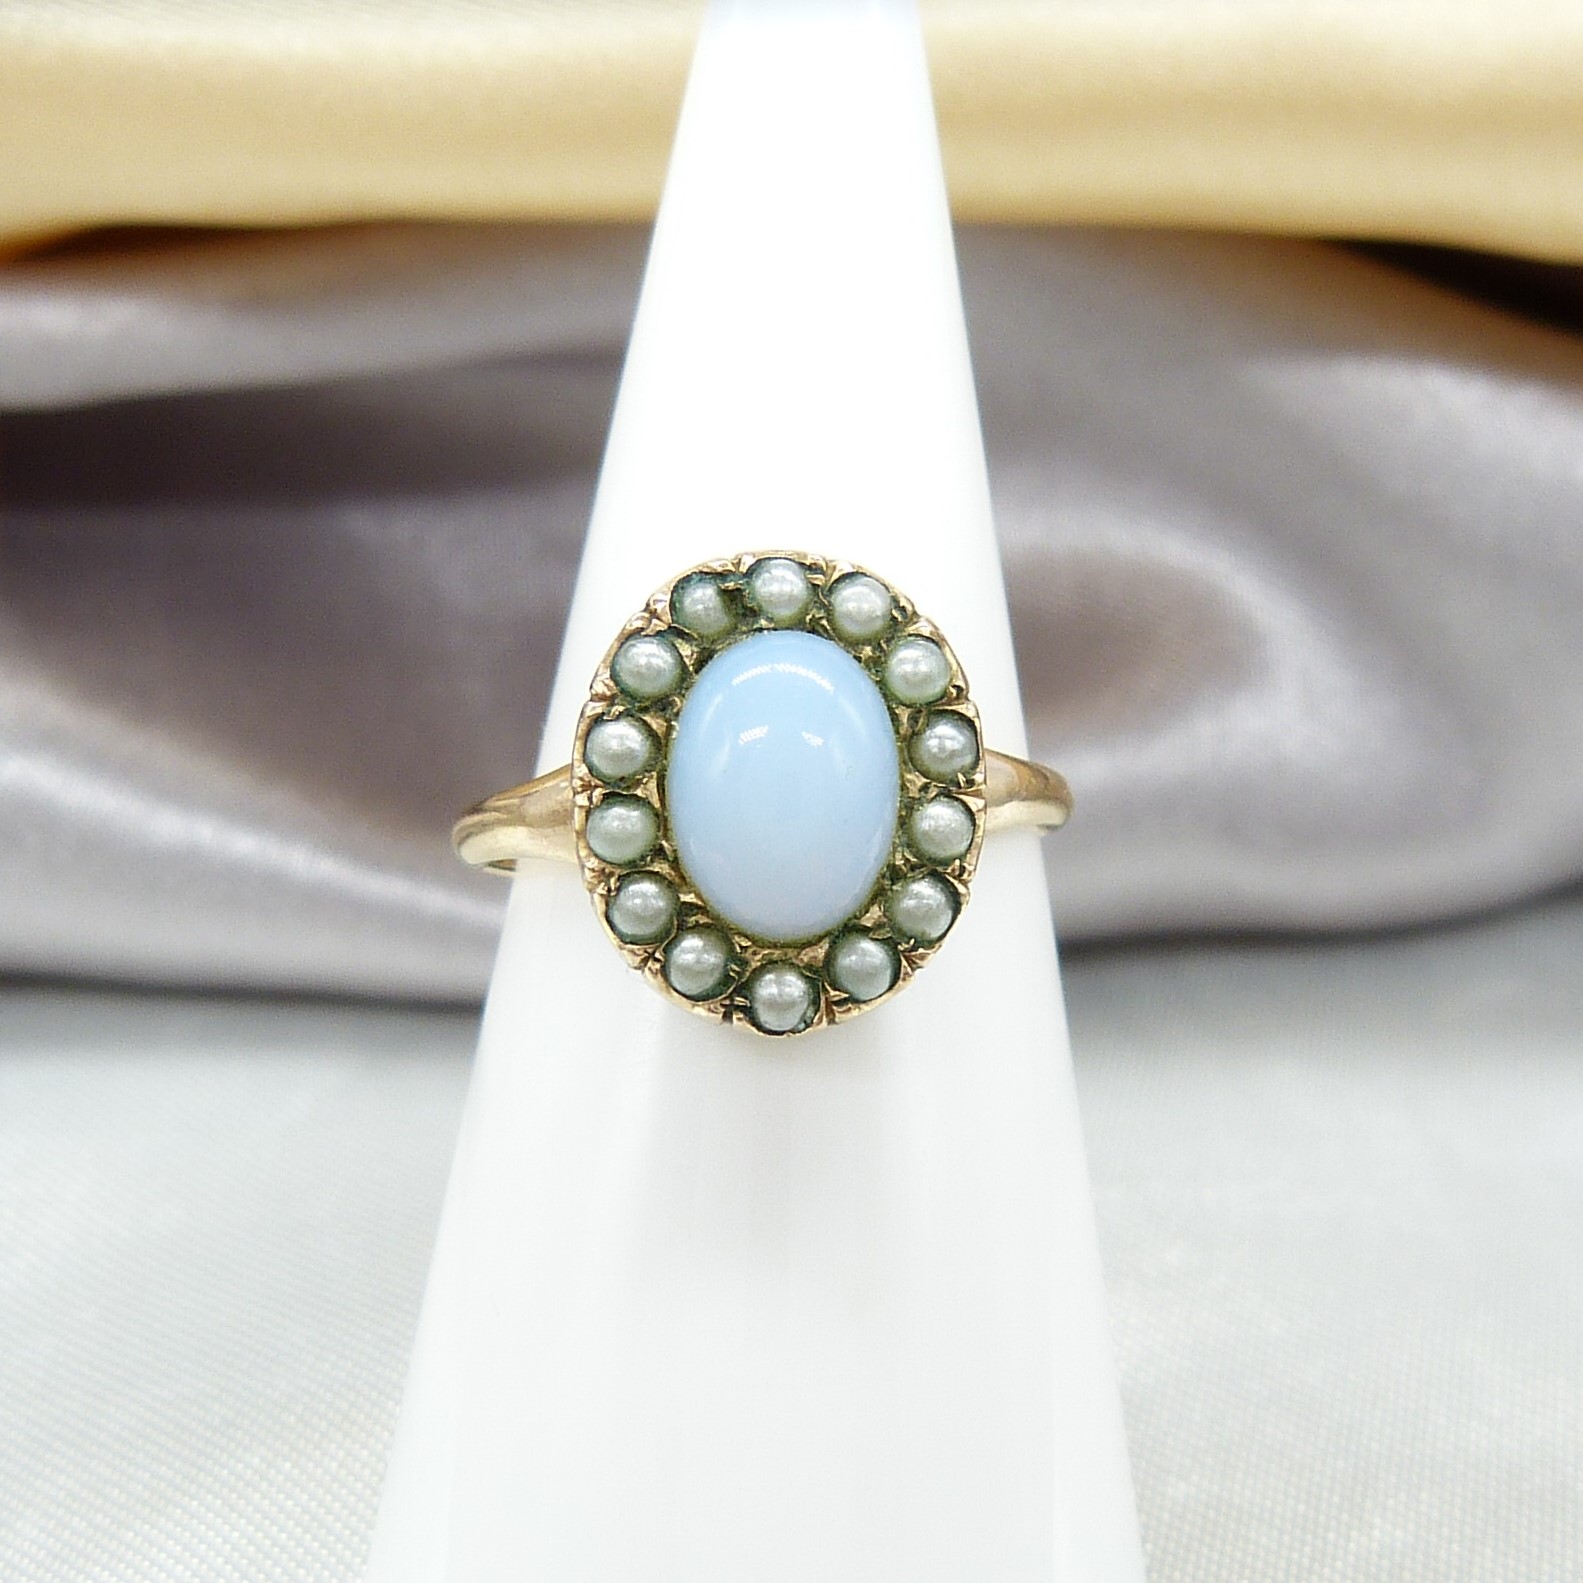 Vintage Victorian-Style Halo Ring Set With Opalite and Seed Pearls - Image 6 of 6